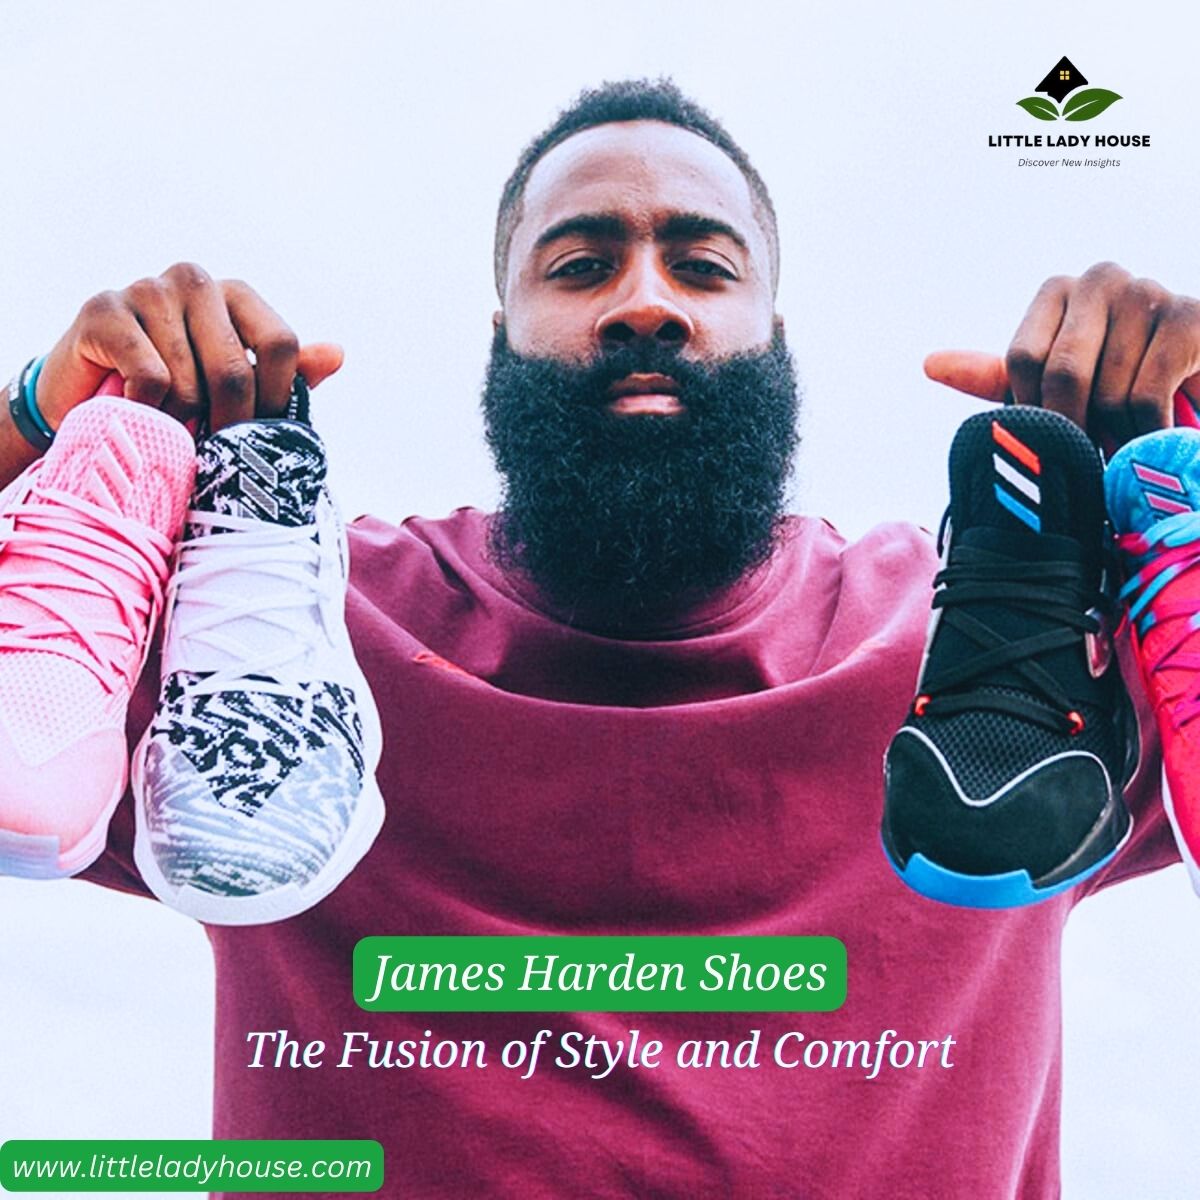 James Harden Shoes: The Fusion of Style and Comfort